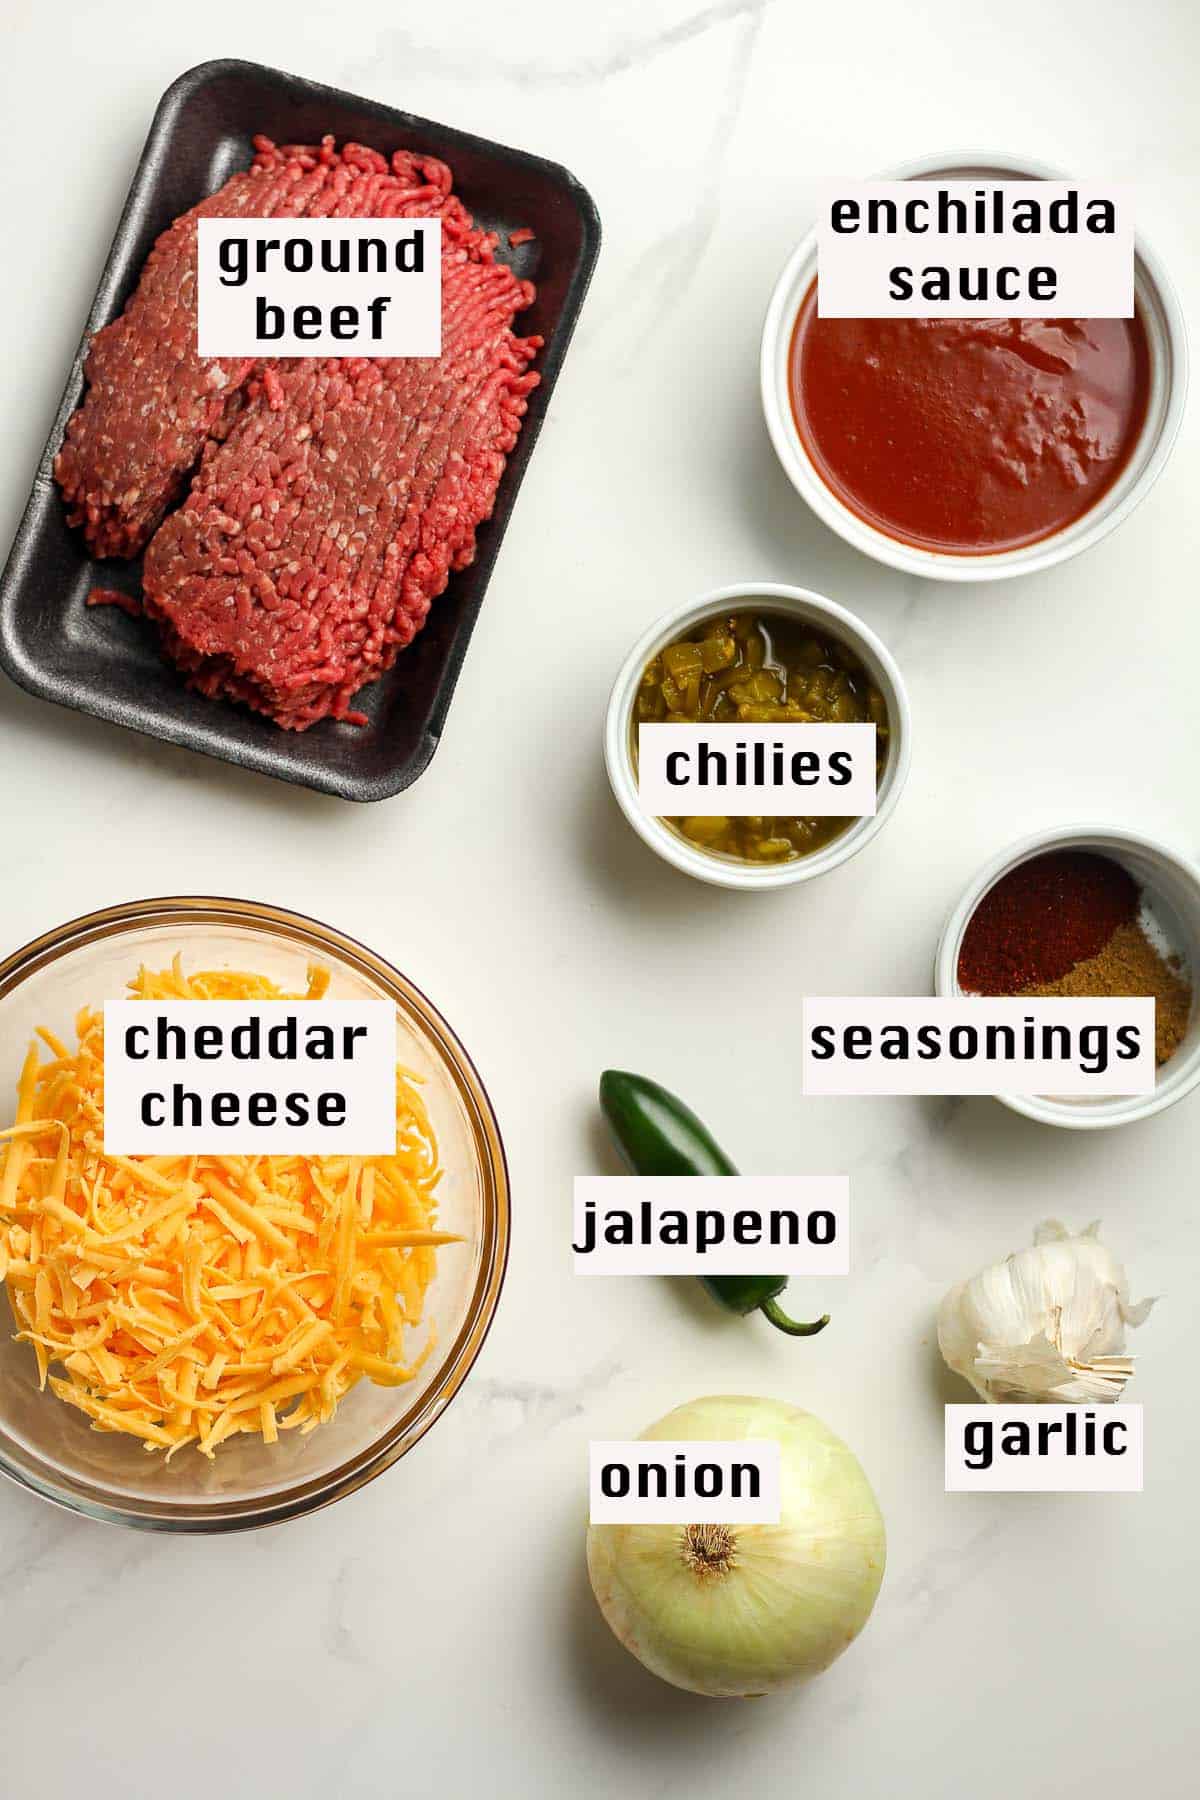 The labeled ingredients for the tamale pie.